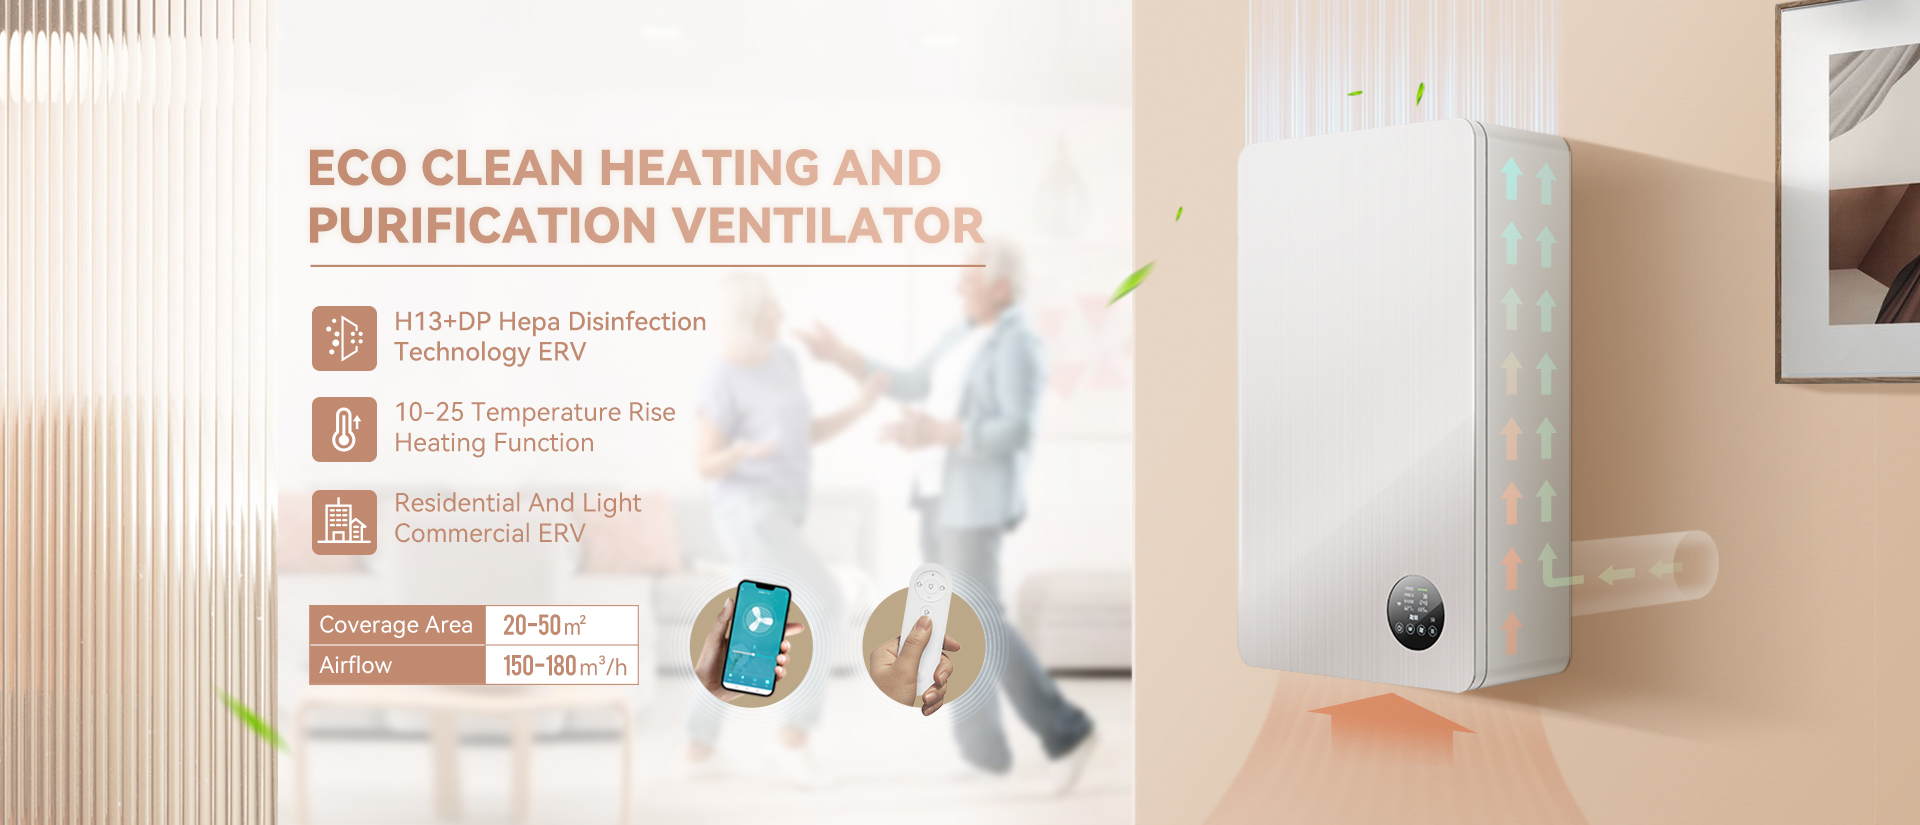 ECO CLEAN HEATING AND PURIFICATION VENTILATOR